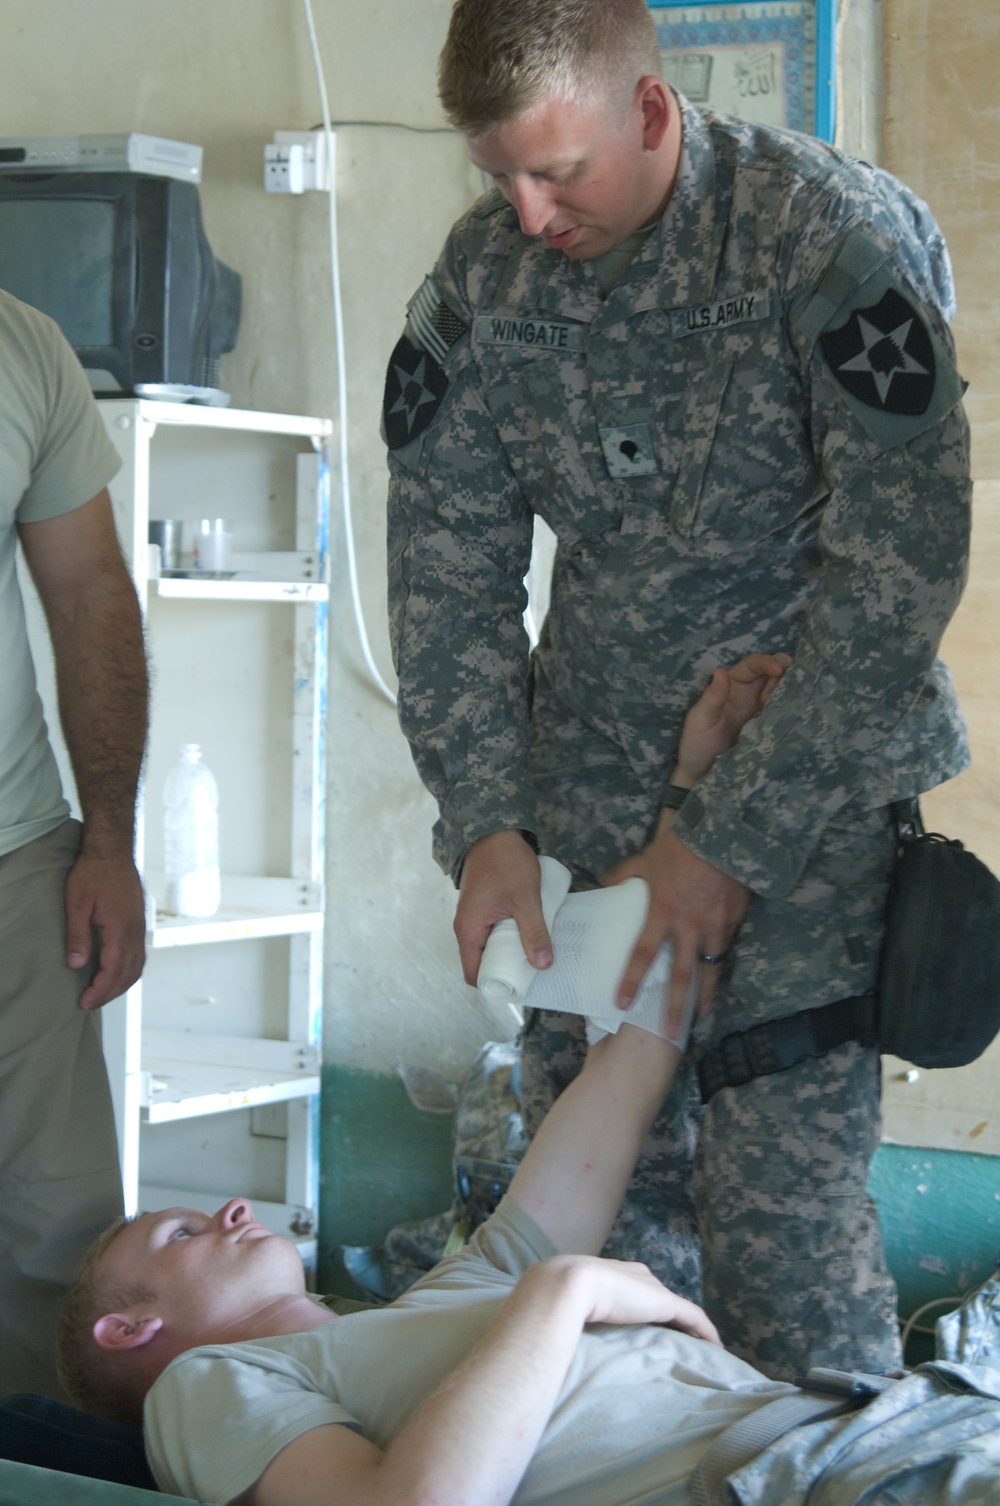 Iraqi soldiers learn first aid